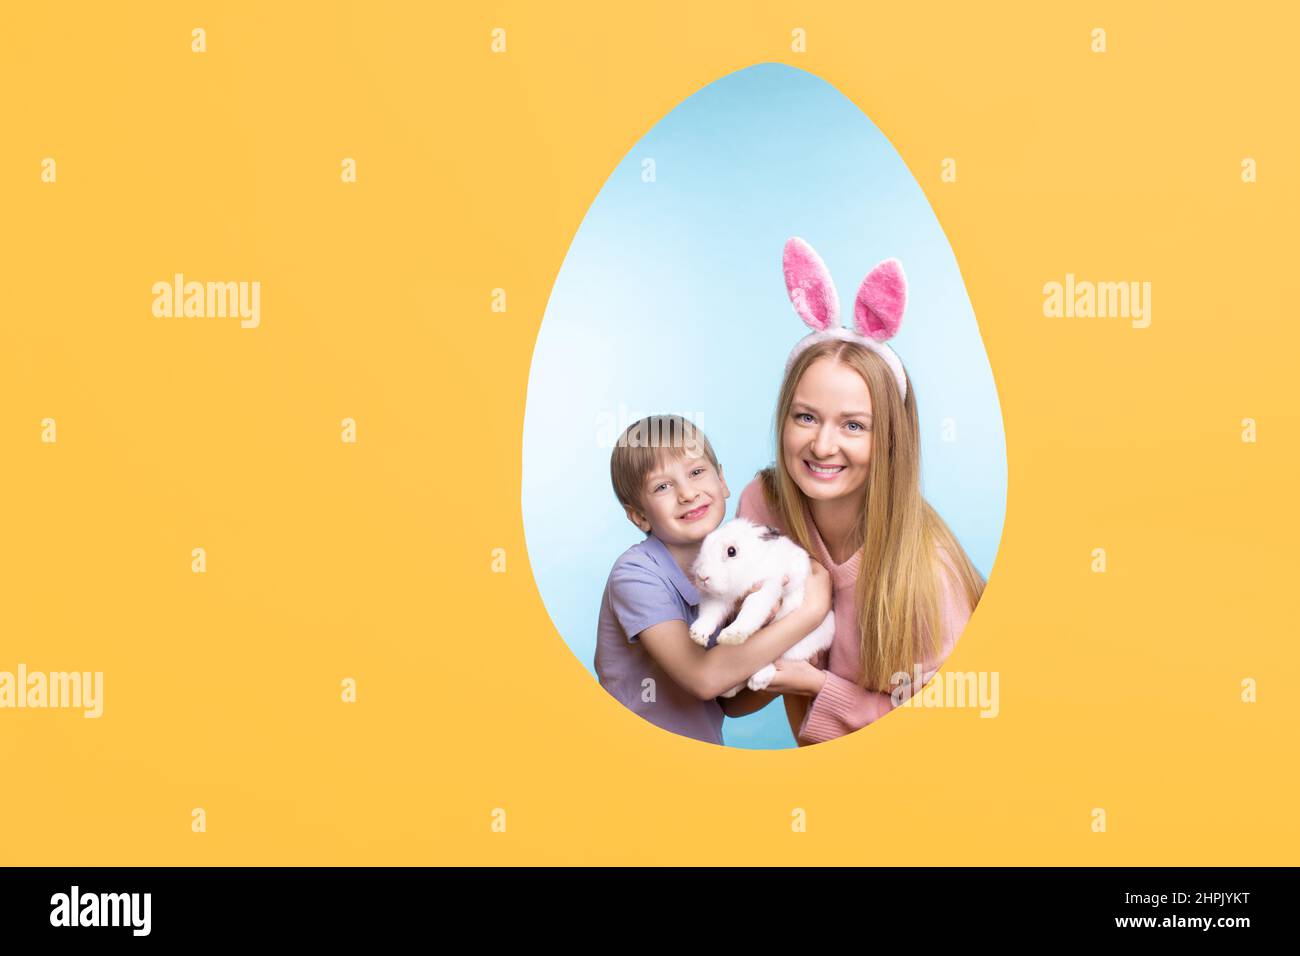 Easter greeting card with yellow copyspace and egg shaped frame with cute little boy and his mother holding white fluffy cute rabbit Stock Photo